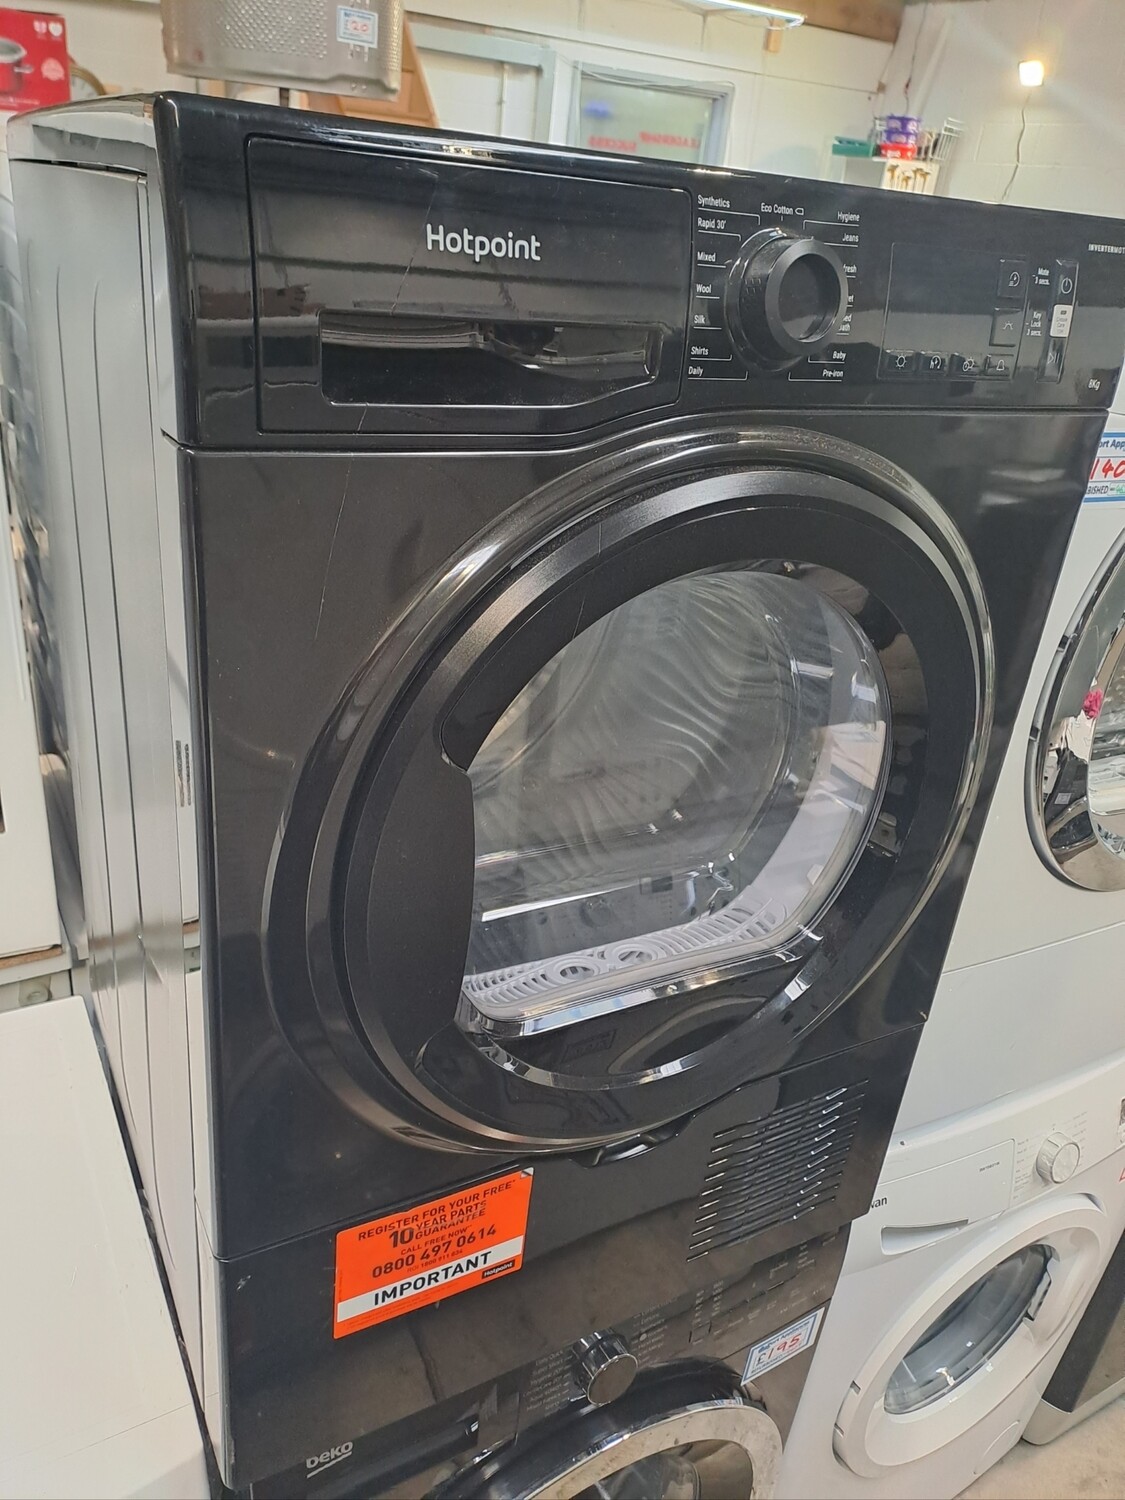 Hotpoint H3D81BUK  8Kg Condenser Dryer Black New Graded 12 Month Guarantee + 10 Year Parts. This item is Located in our Whitby Road Shop